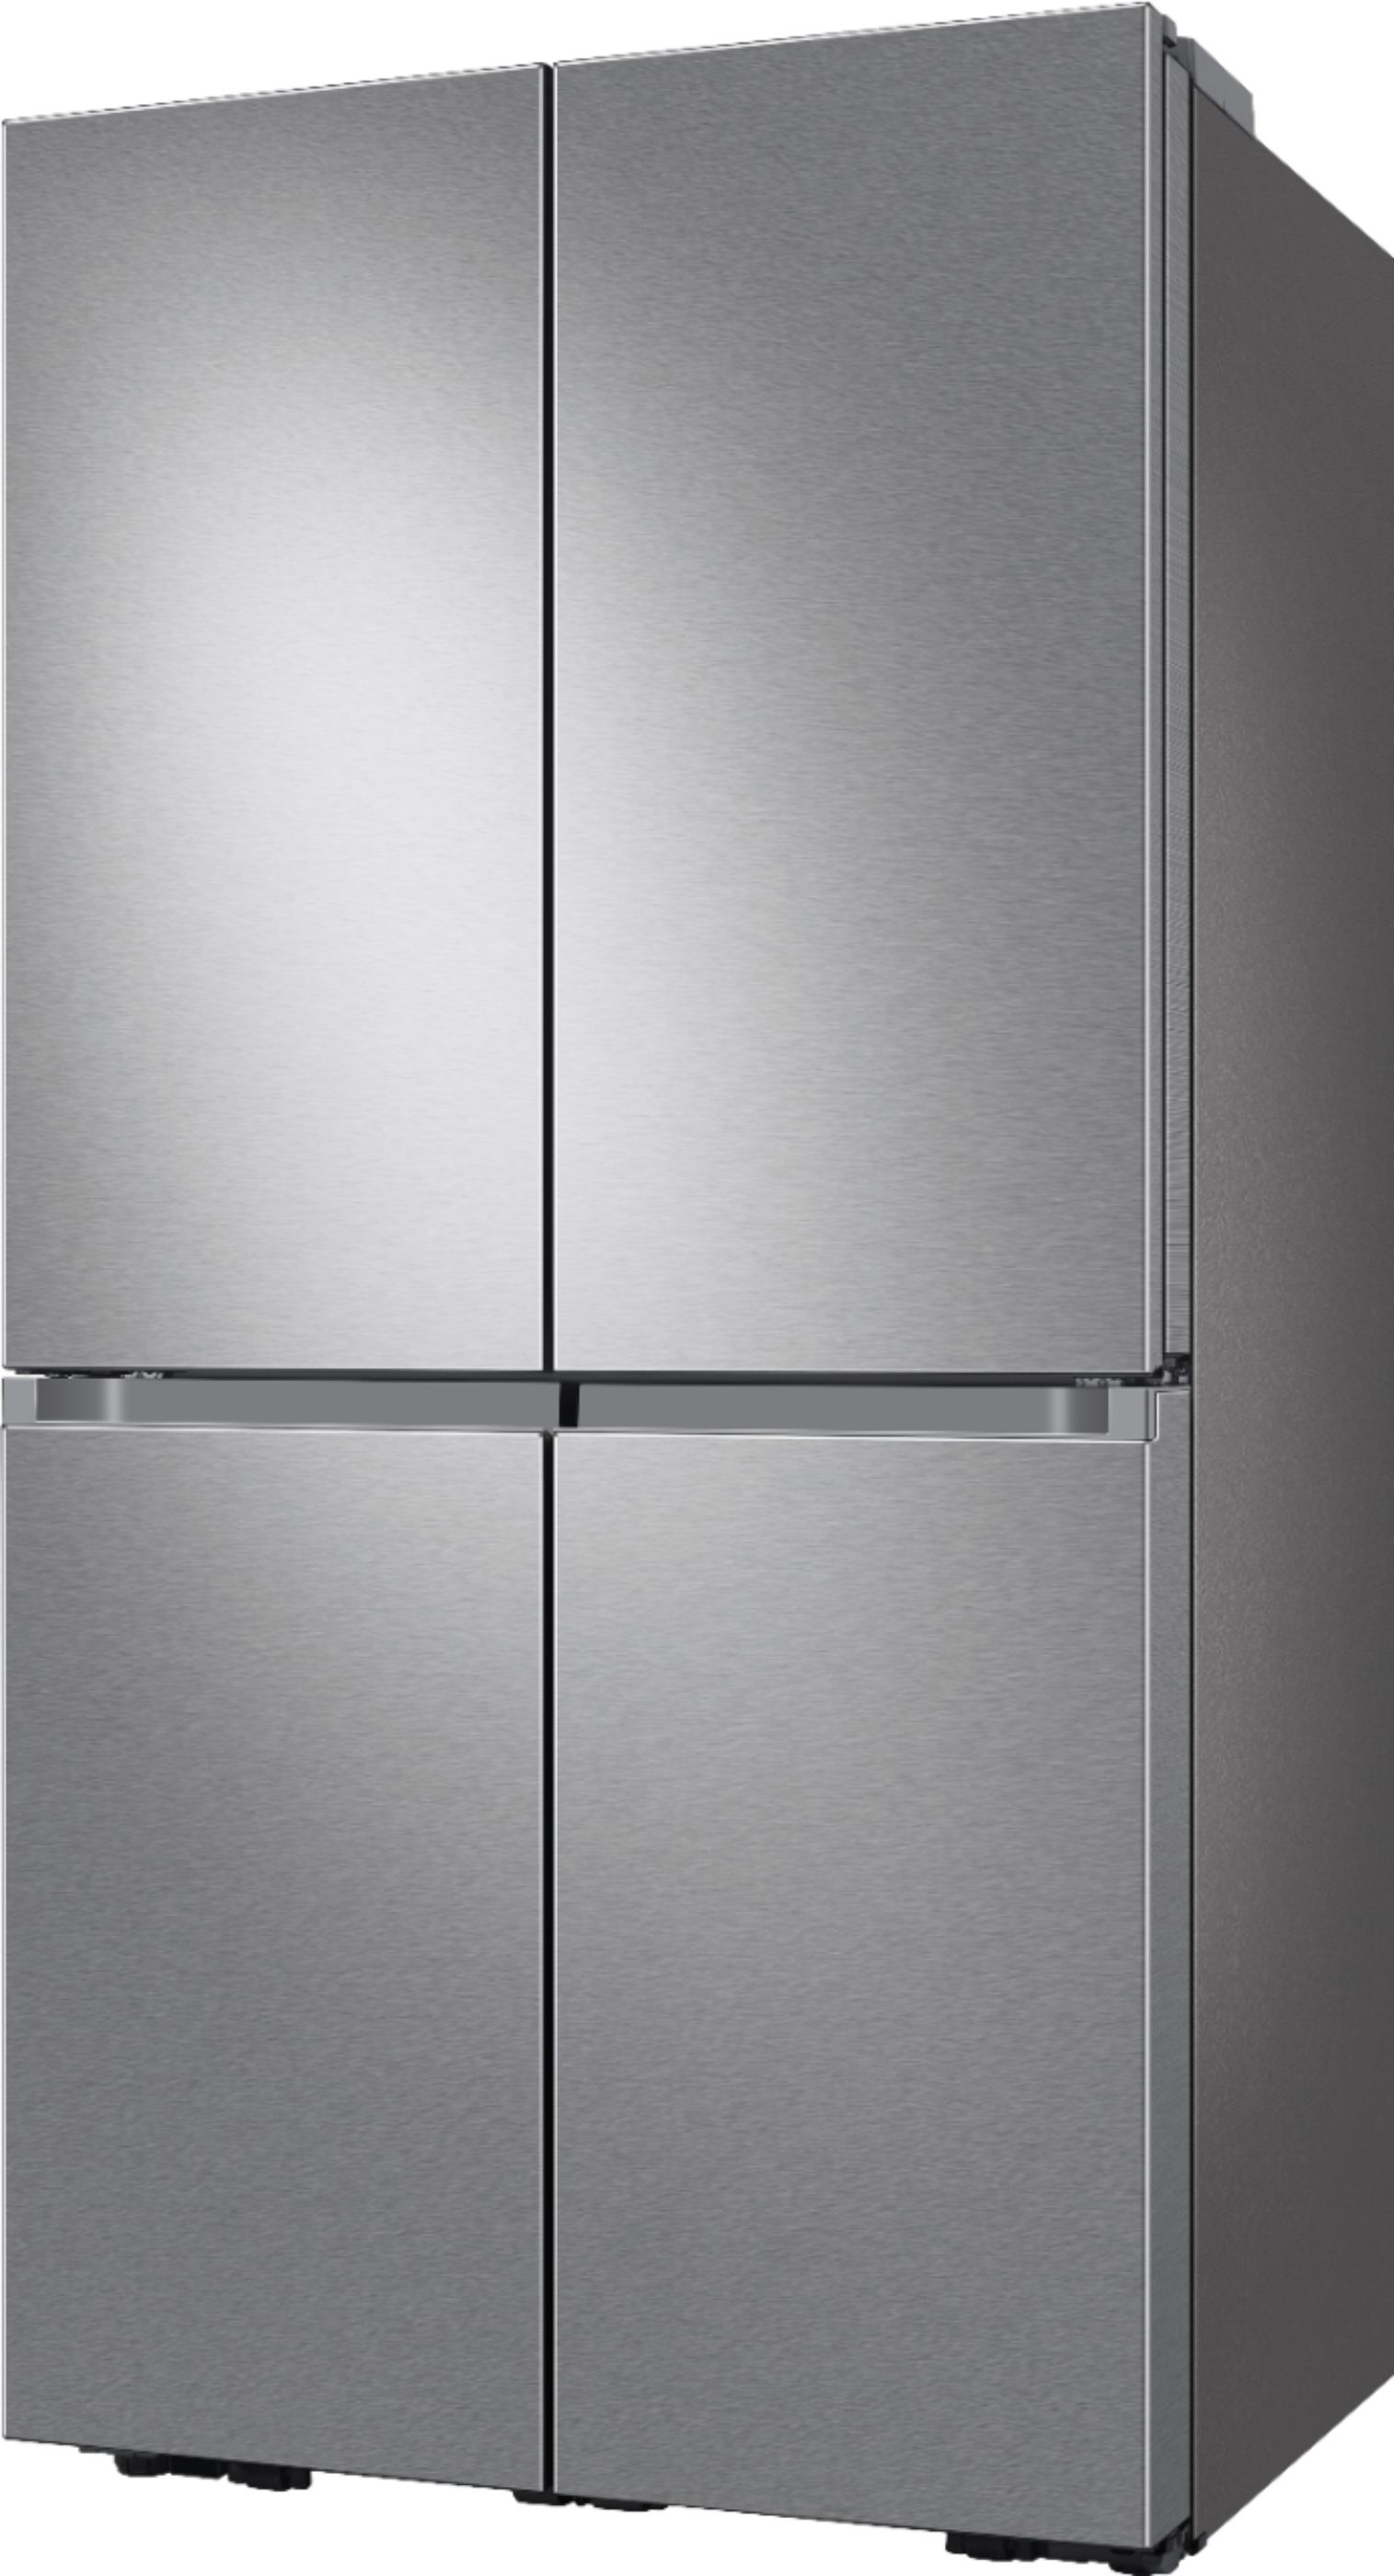 Angle View: Samsung - 23 cu. ft. 4-Door Flex™ French Door Counter-Depth Refrigerator with WiFi, AutoFill Water Pitcher & Dual Ice Maker - Black stainless steel